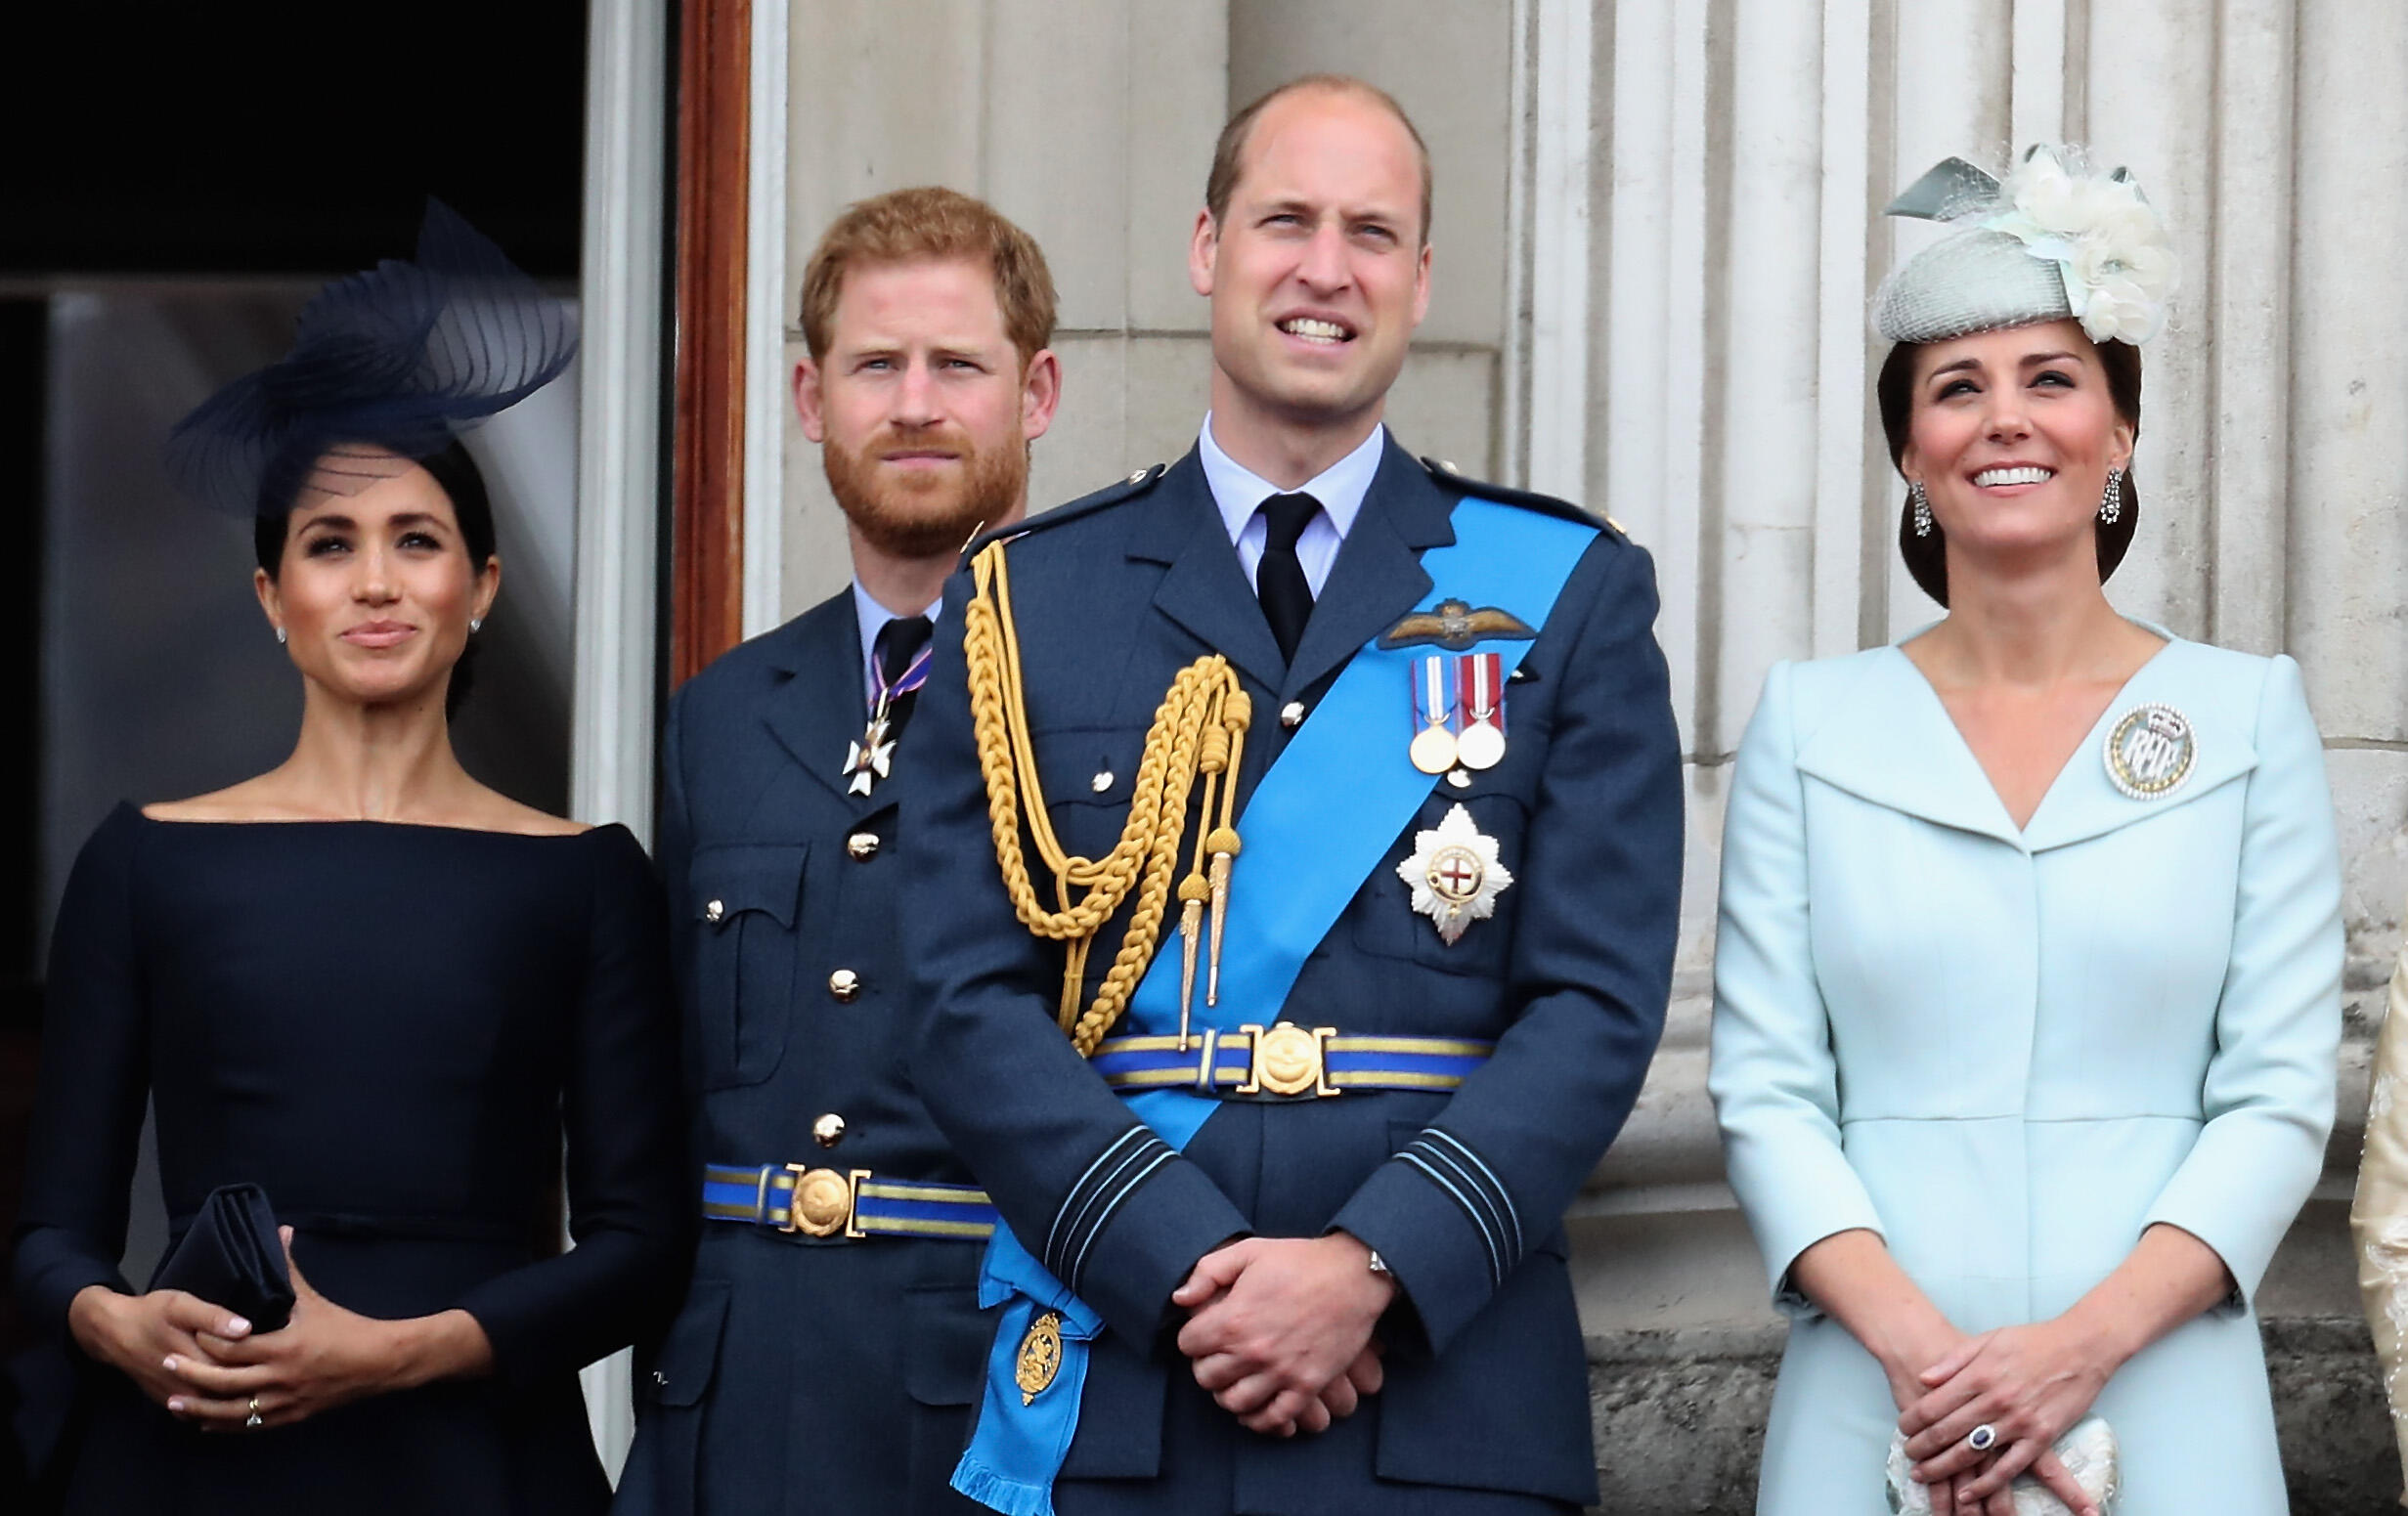 TLC To Release Documentary About All The Royal Drama - Thumbnail Image